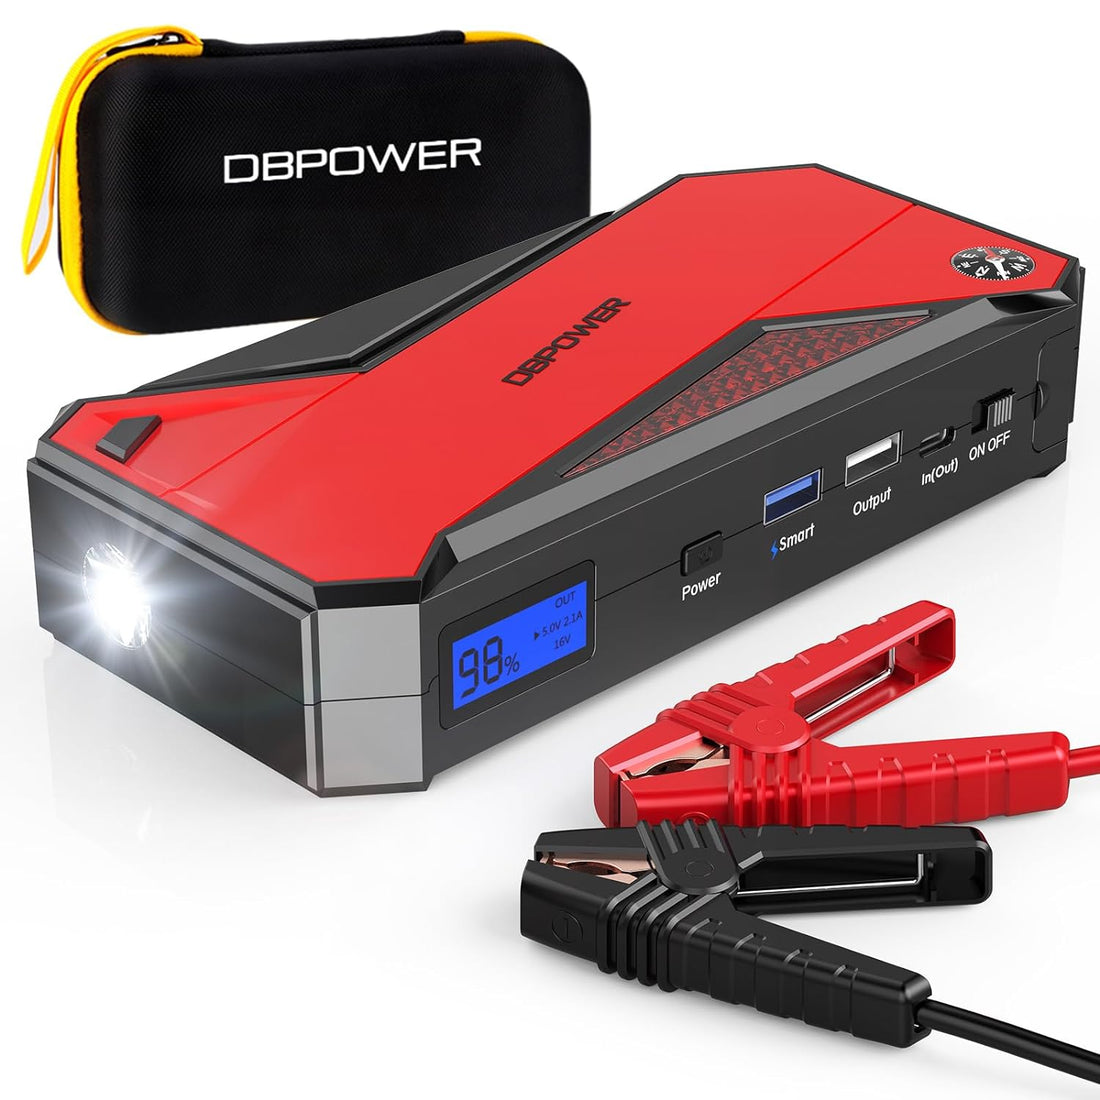 DBPOWER Portable Car Jump Starter DJS50 External Battery Smart Charger Power Bank with Compass, LCD Screen and LED 600A Peak 18000mAh (Black/Red)